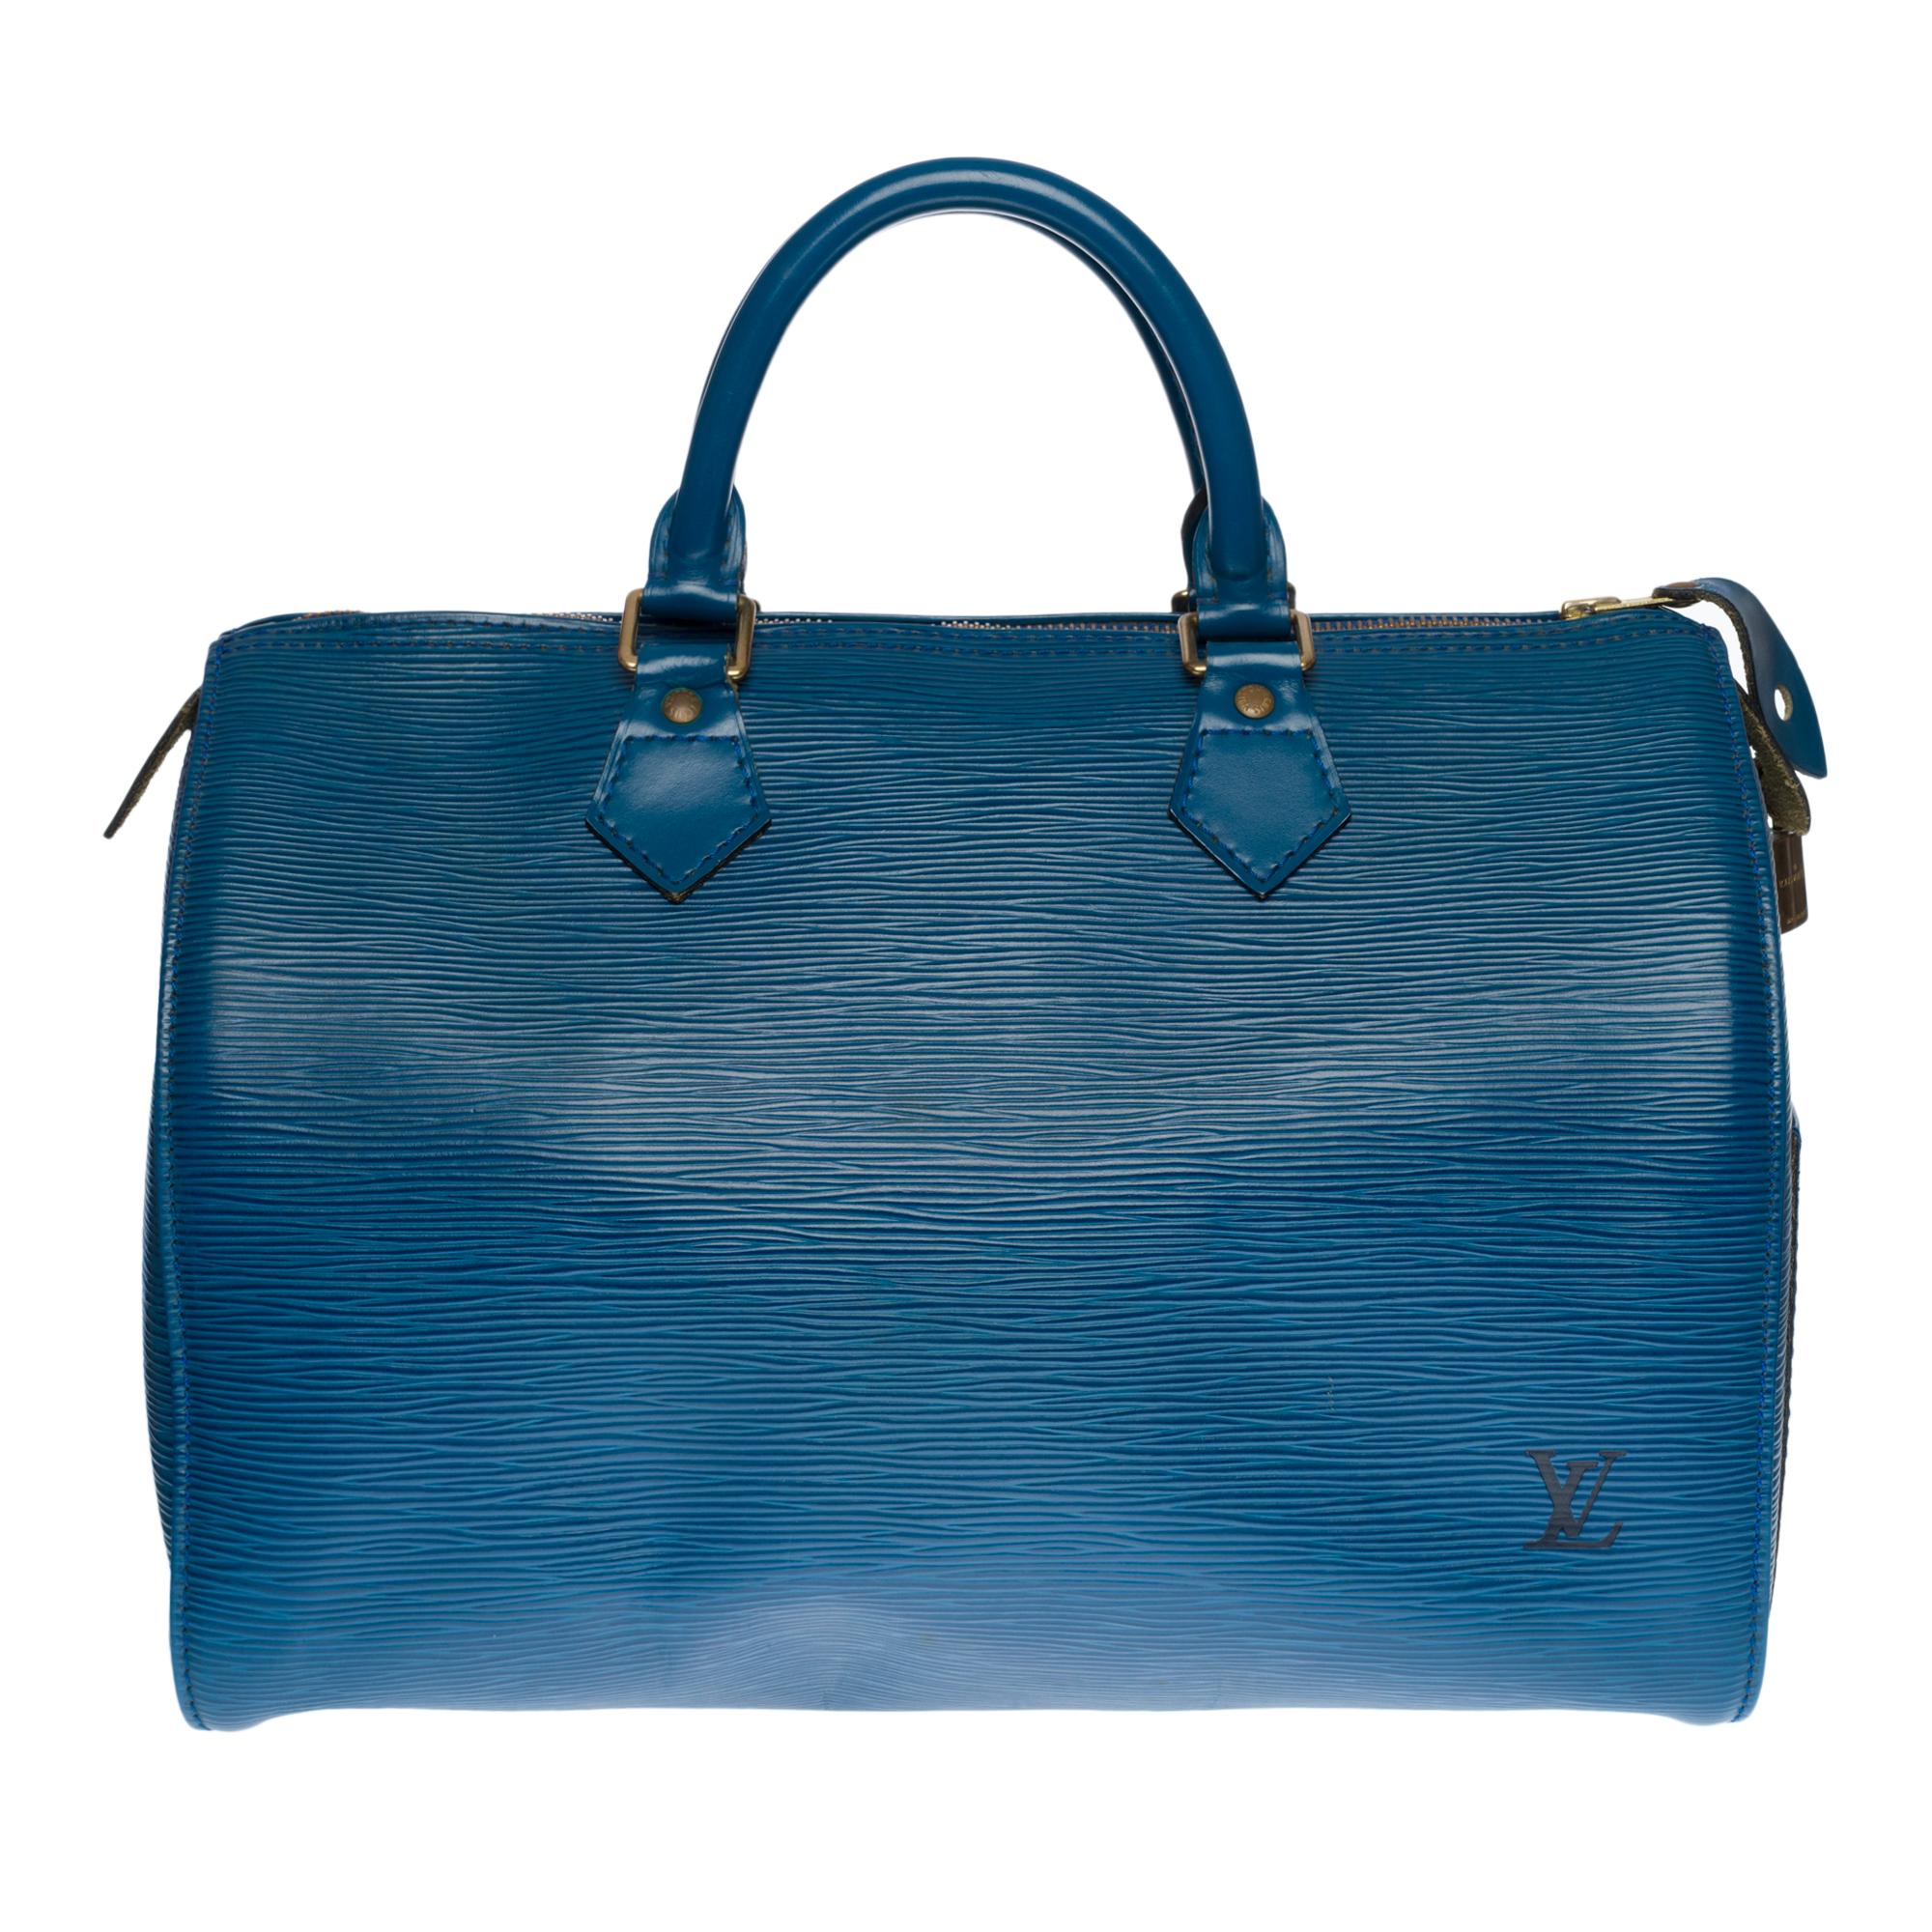 Superb Louis Vuitton Speedy 30 handbag in blue epi leather, gilded metal hardware, double blue leather handle for hand-carrying
Zip closure
A side patch pocket
Blue suede interior
Signature: 